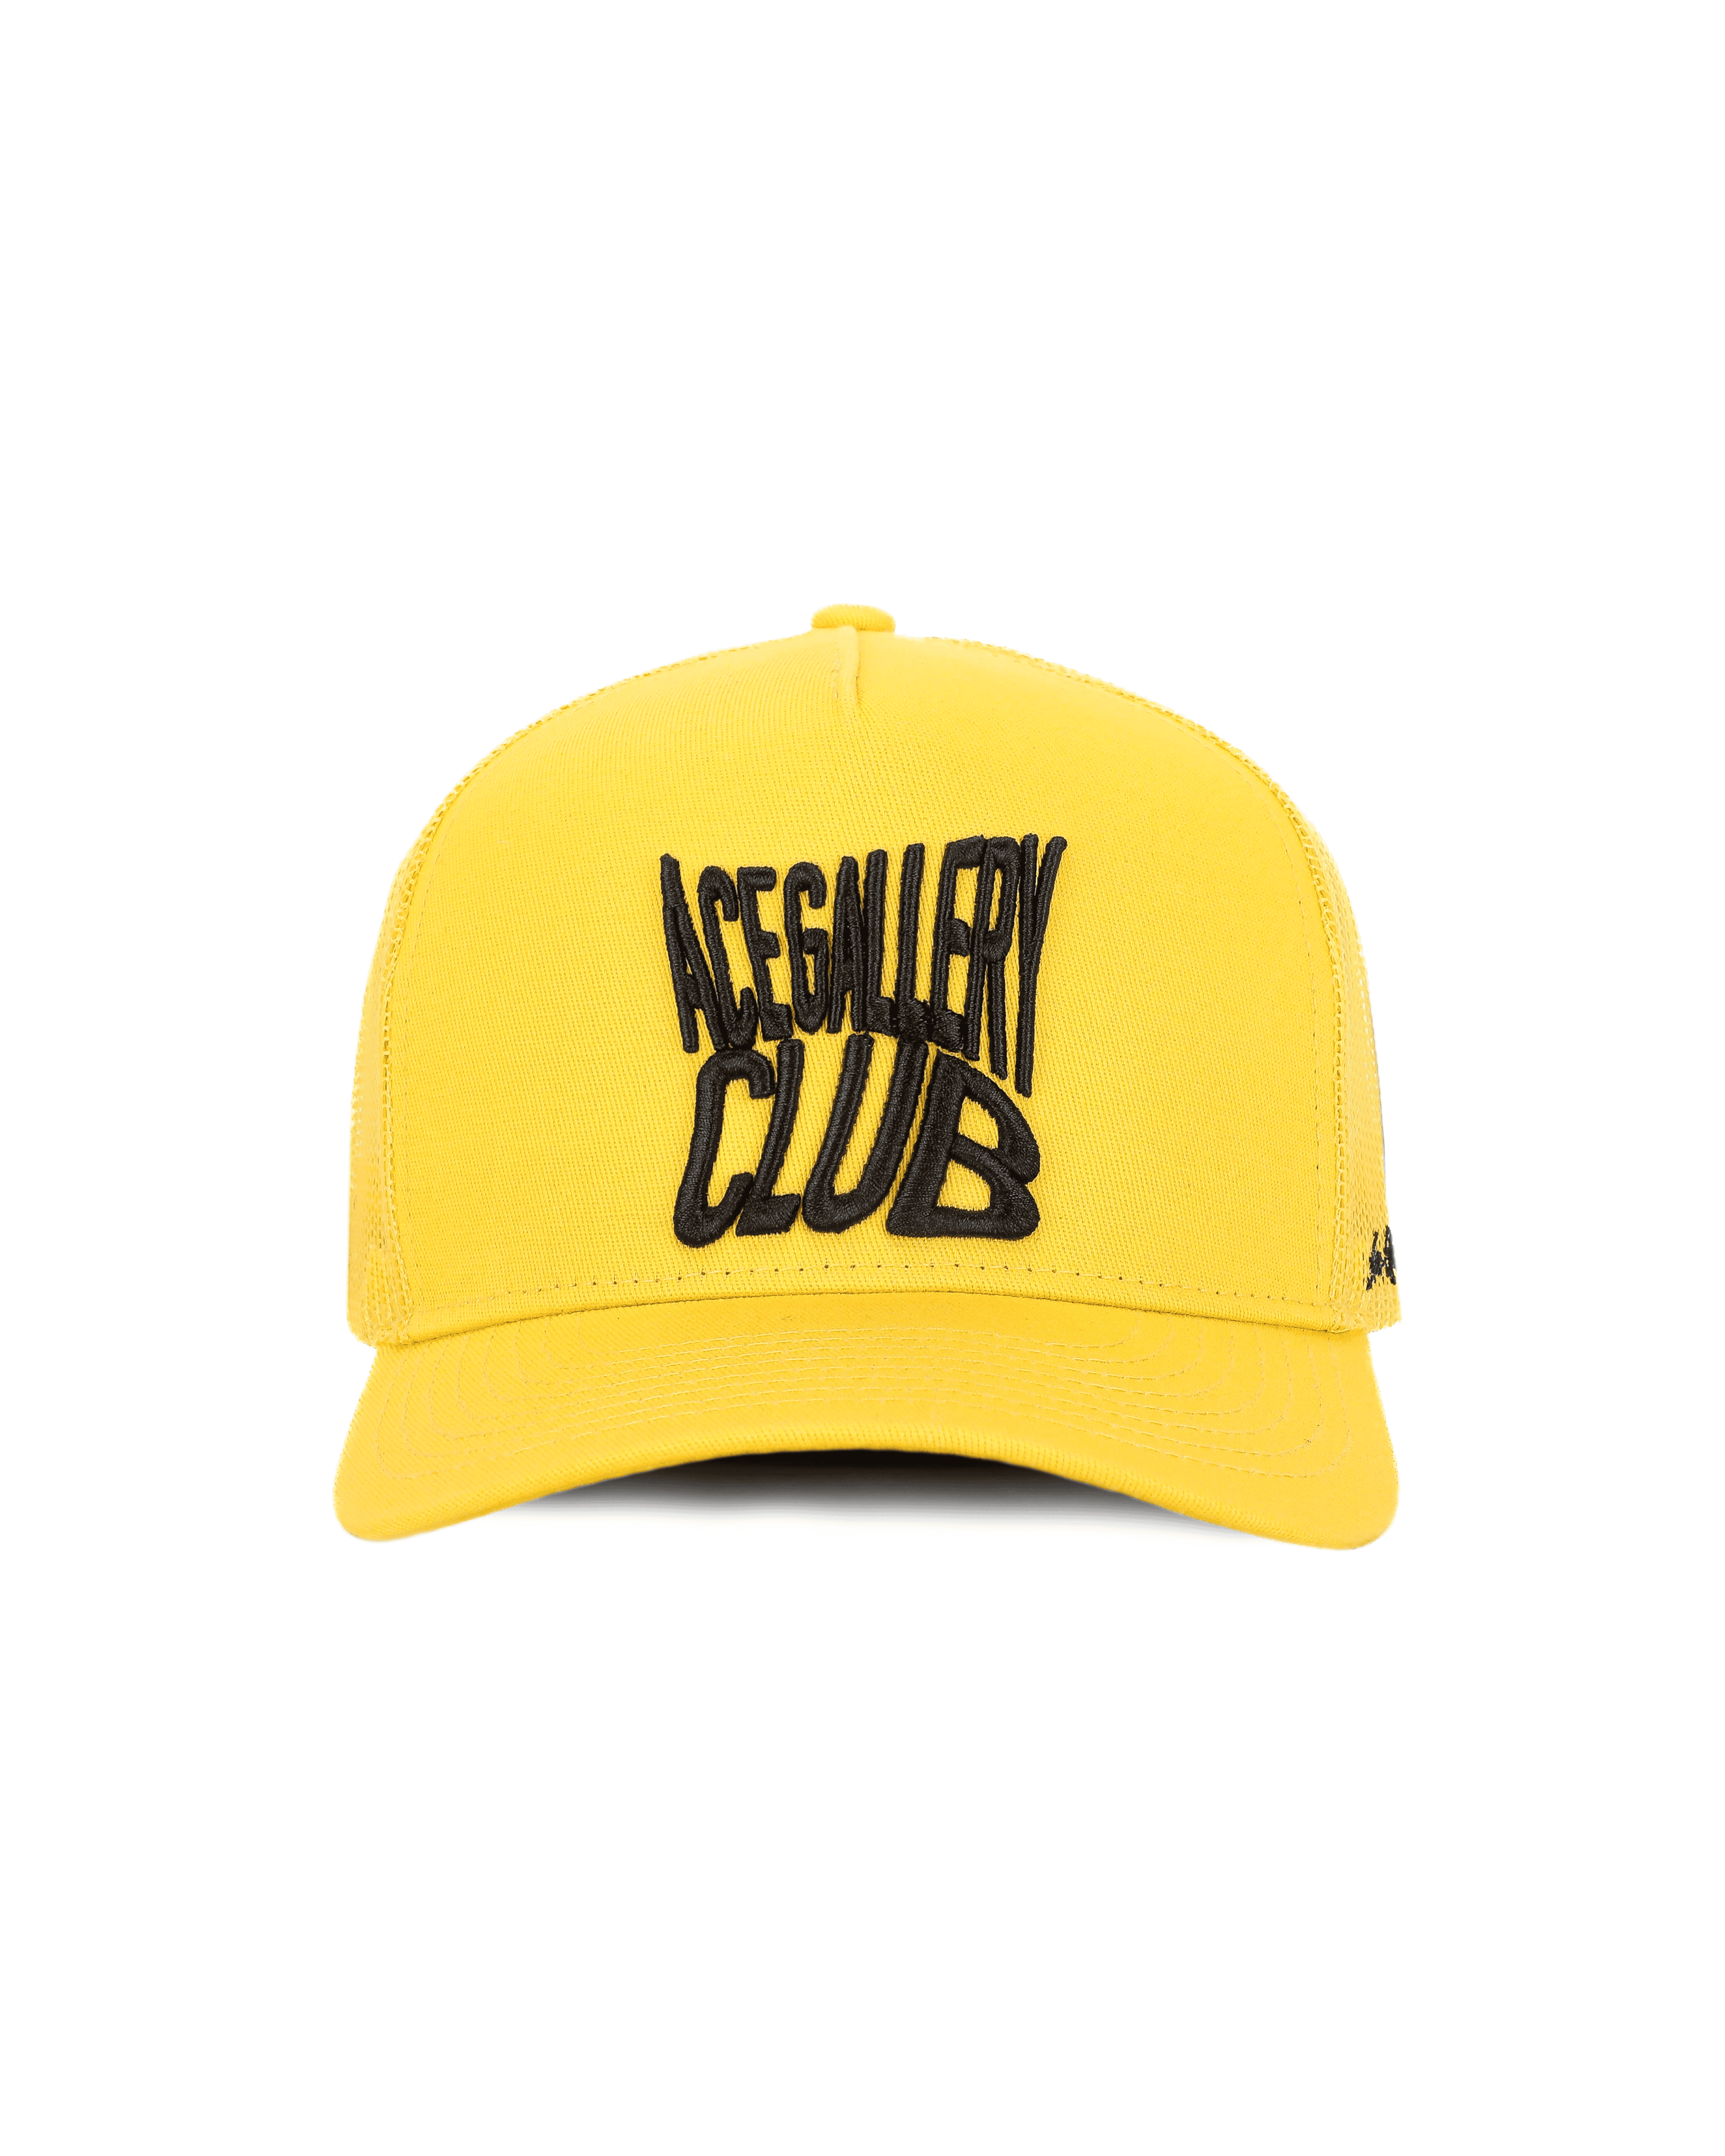 THE WAVY TRUCKER HAT - YELLOW – ACE GALLERY CLUB